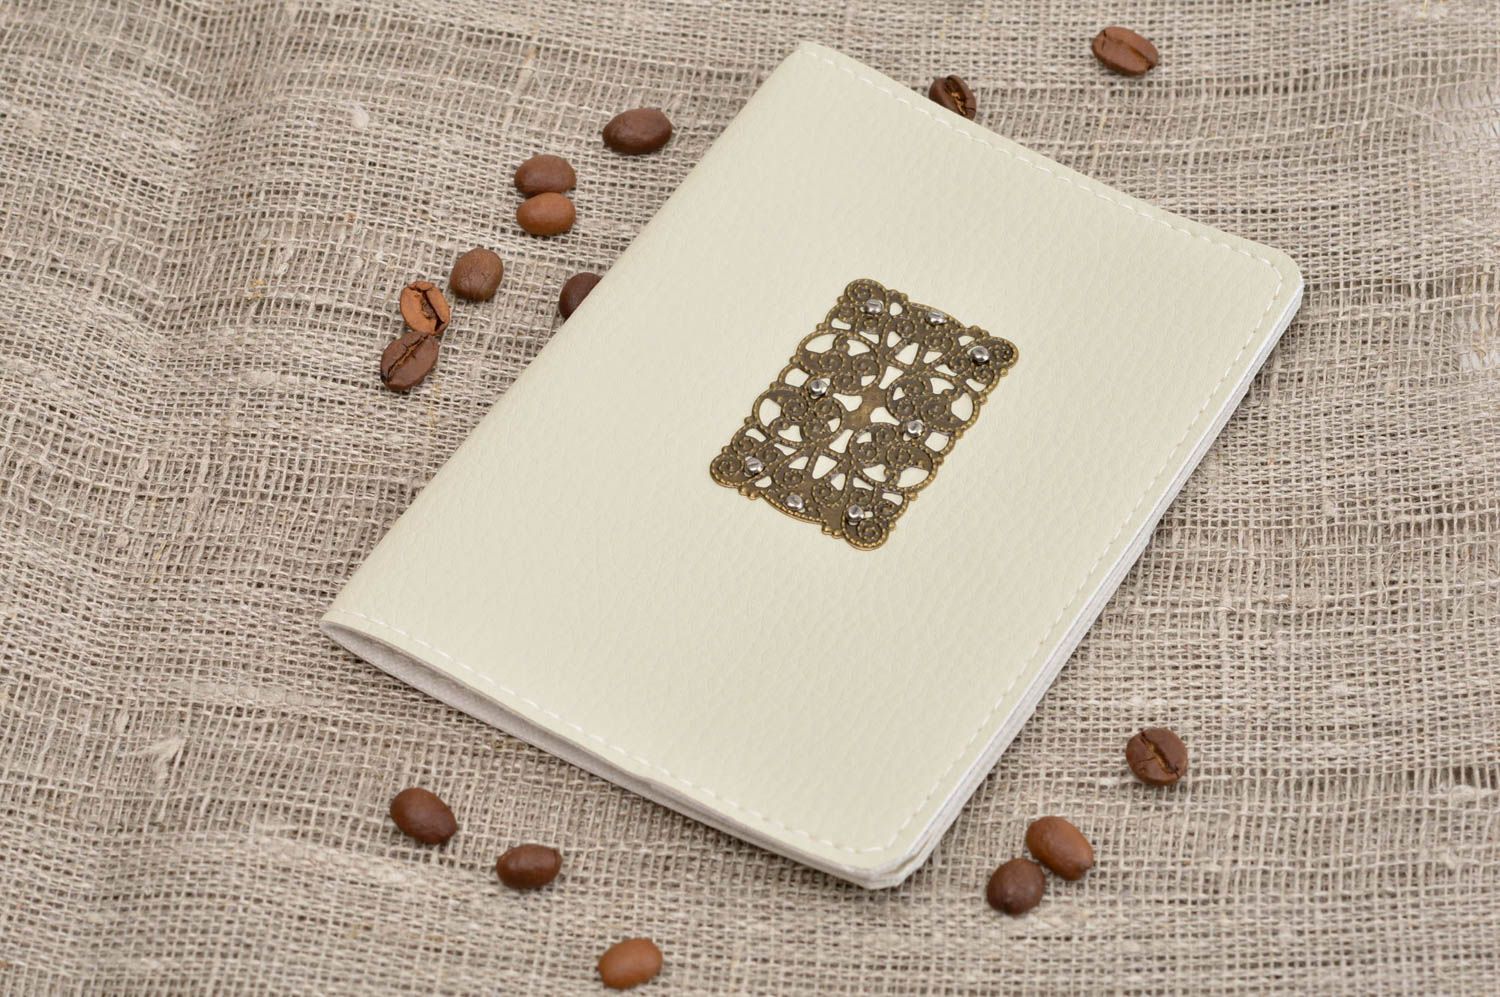 Handmade cover for passport leather passport cover unusual accessory gift ideas photo 1